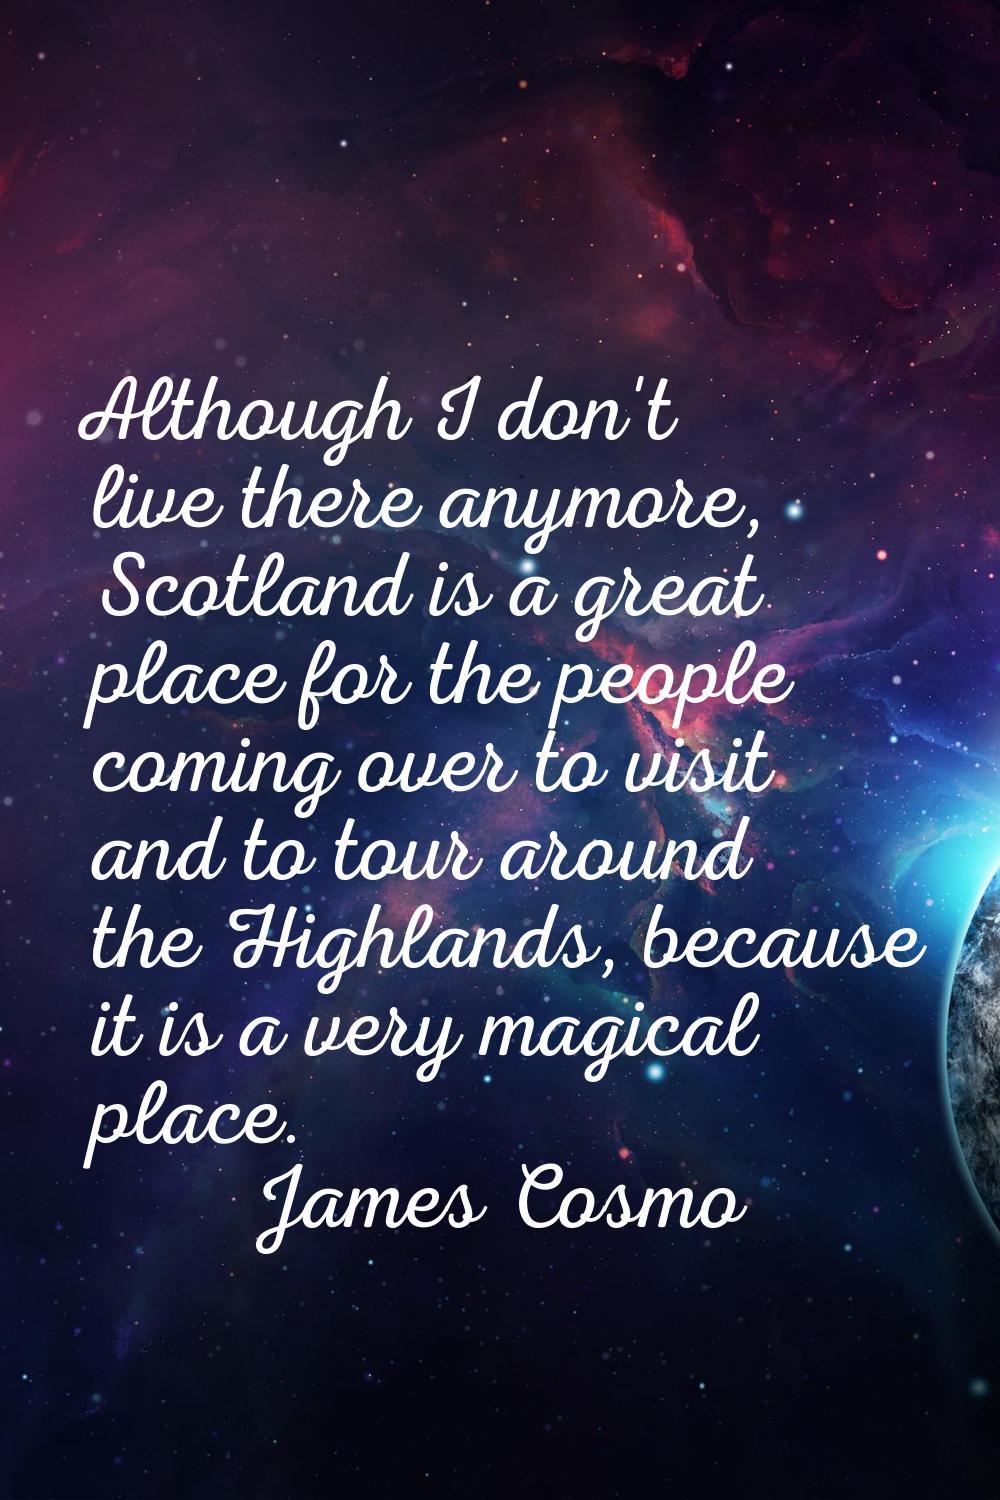 Although I don't live there anymore, Scotland is a great place for the people coming over to visit 